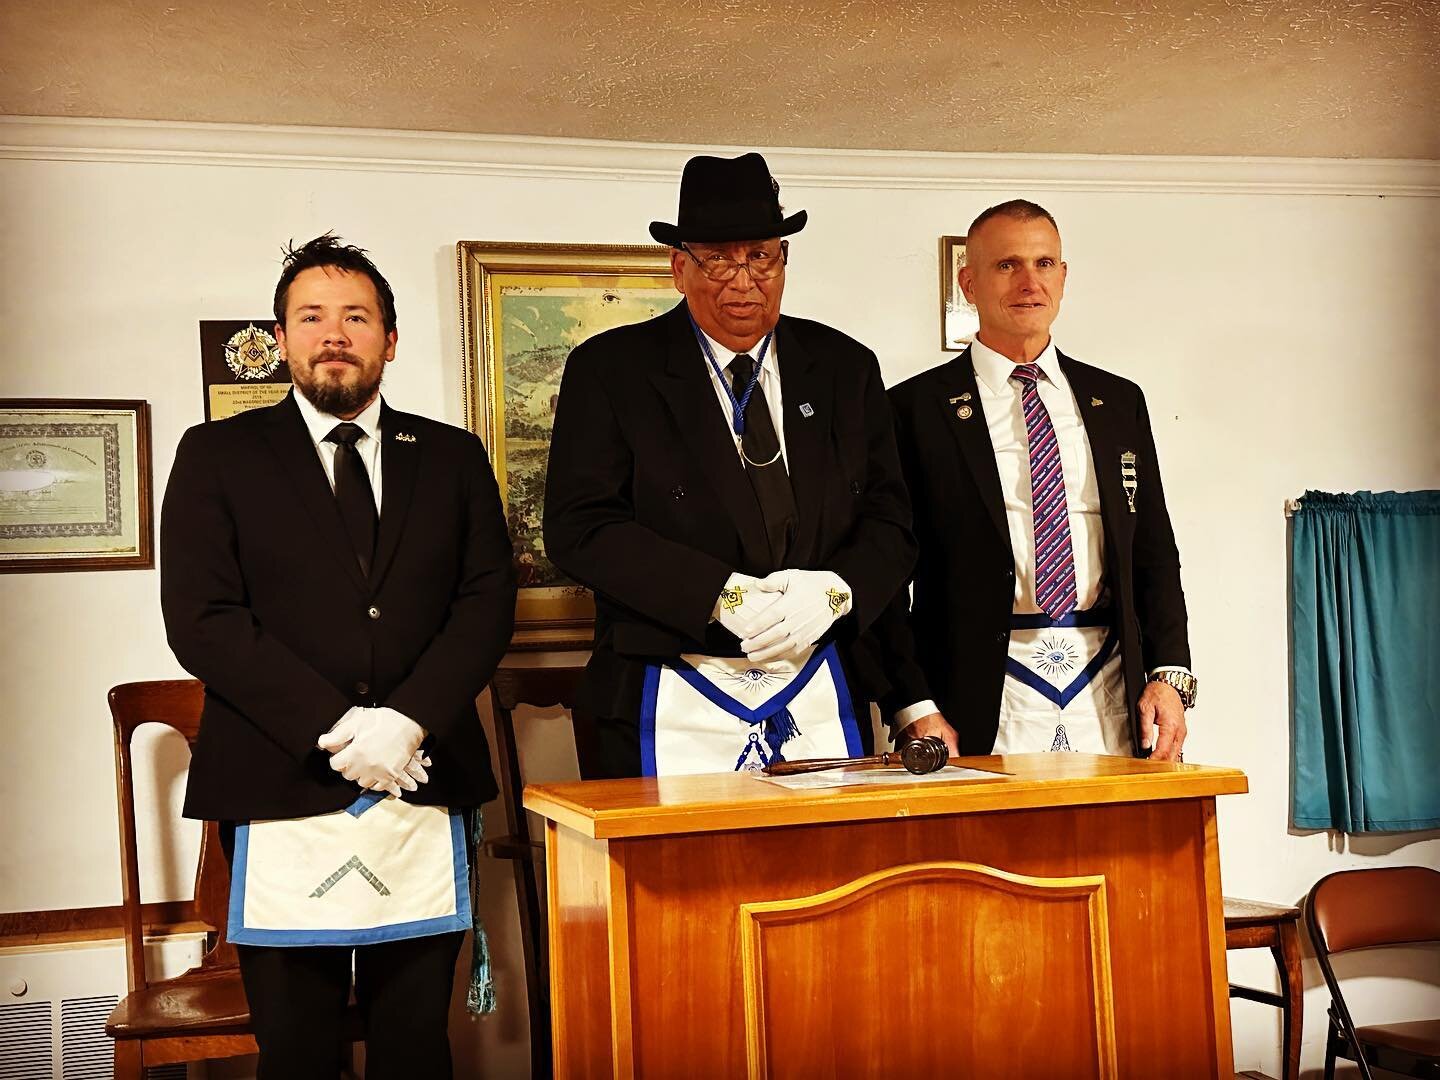 Members of Liberty Lodge No 95 AF&amp;AM and Bedford Lodge No 244 AF&amp;AM made a fraternal visit to our Prince Hall Brethren at Big Island Lodge No 316 F&amp;AM. P.H.A.